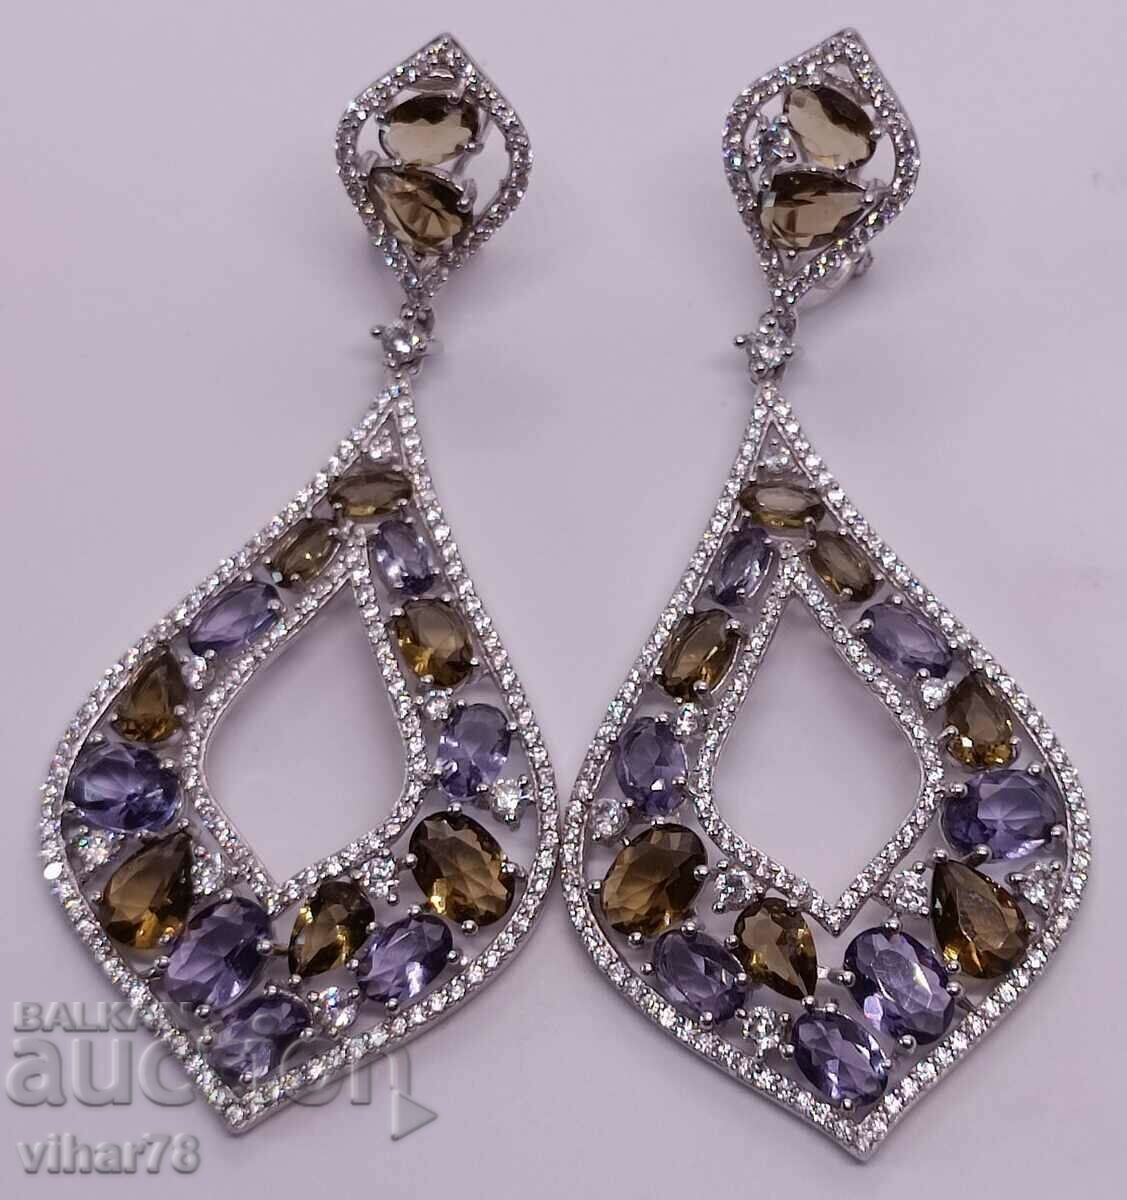 Silver earrings with amethyst and citrine